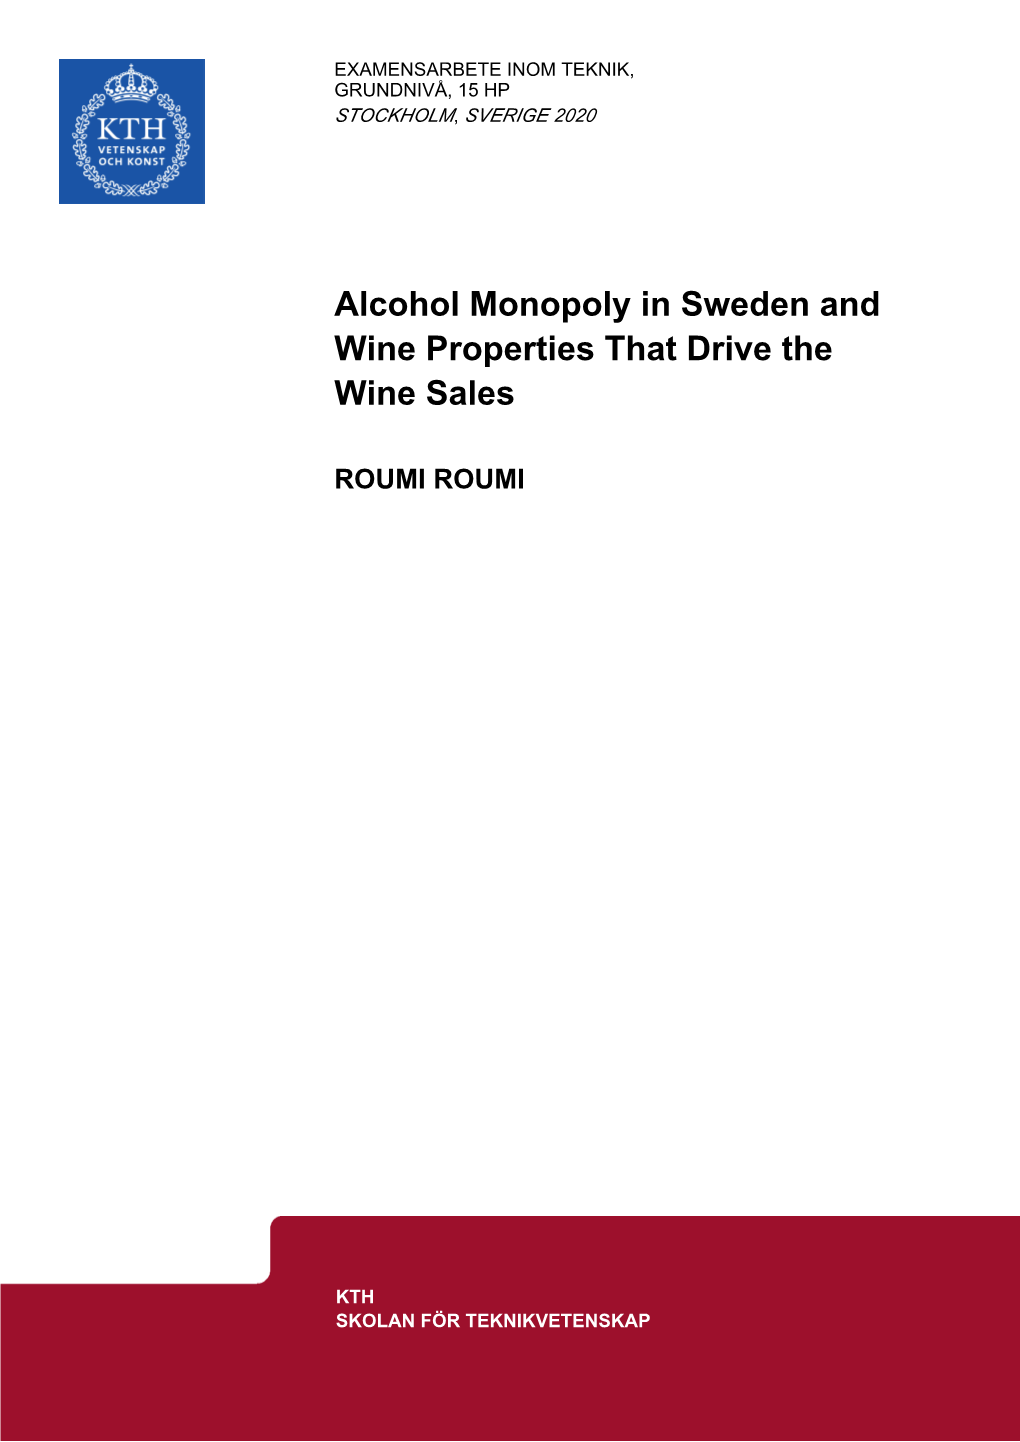 Alcohol Monopoly in Sweden and Wine Properties That Drive the Wine Sales